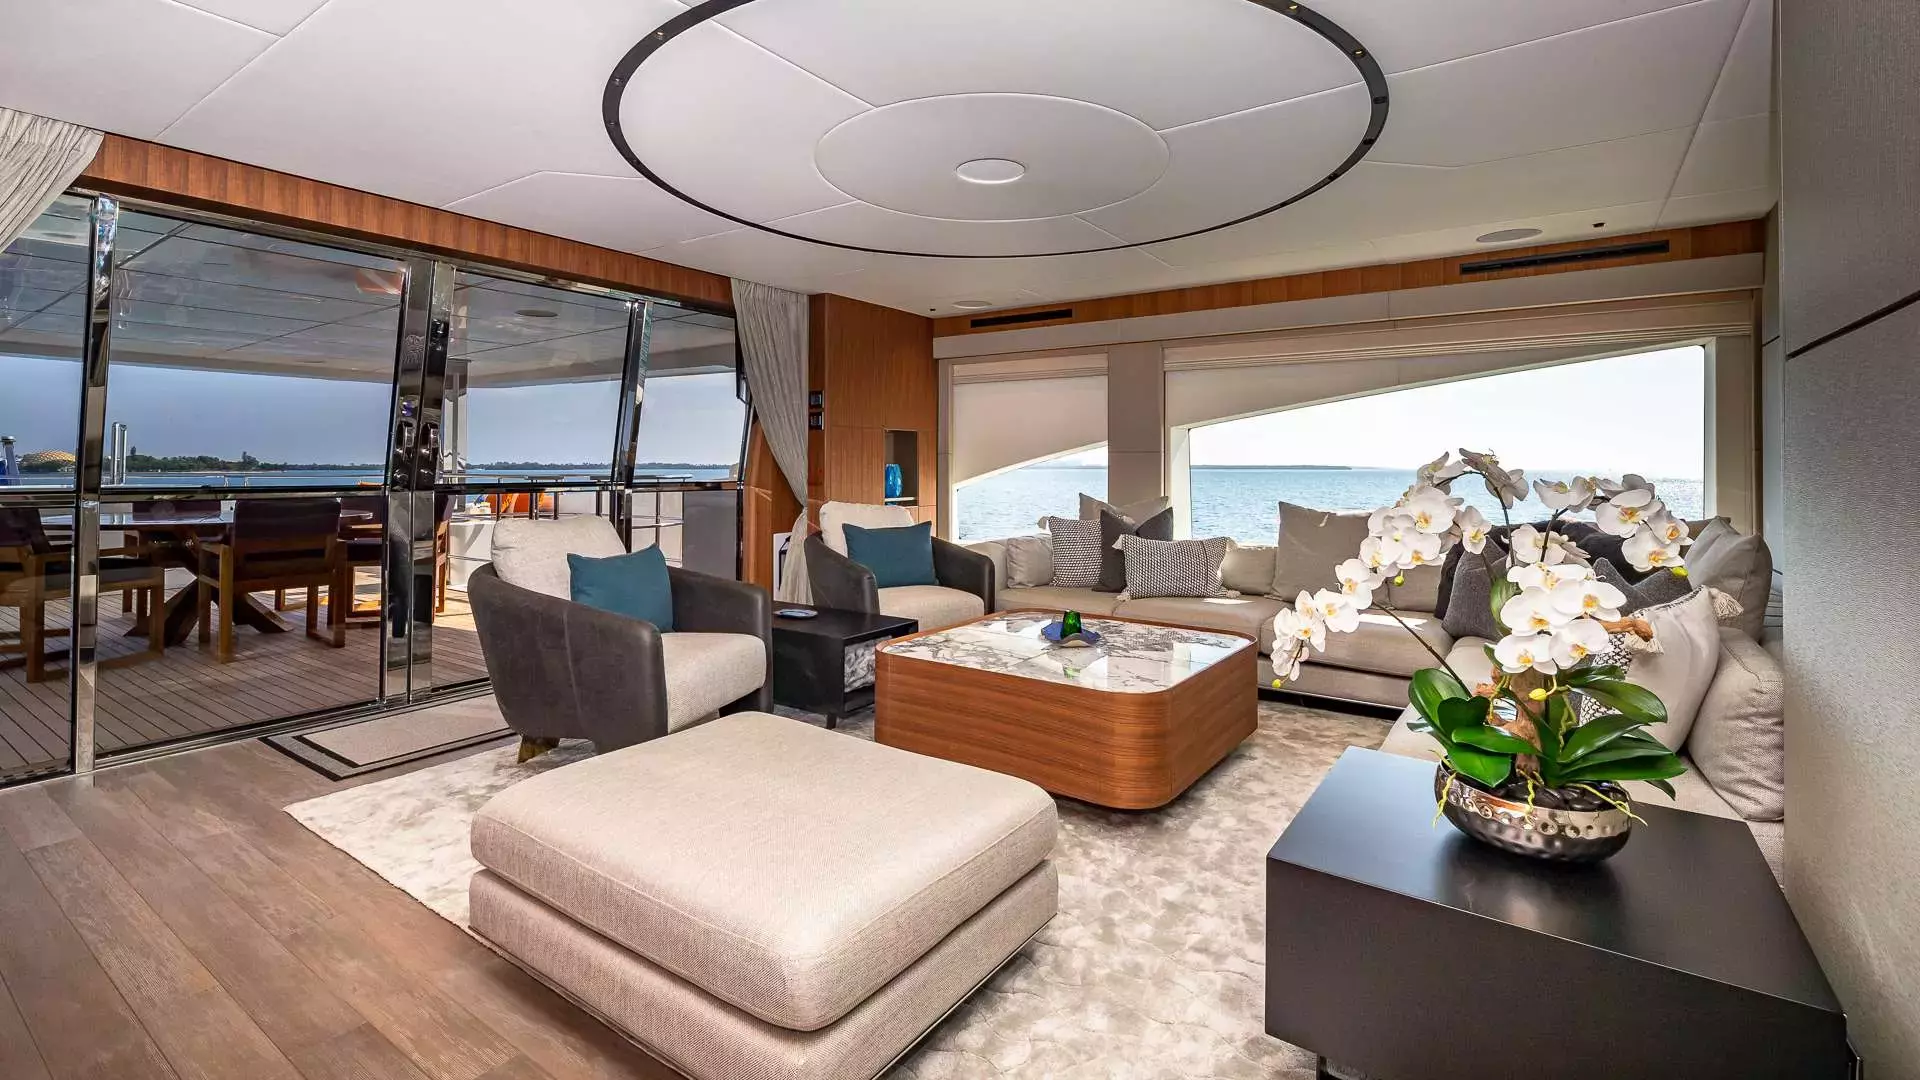 Rising Dawn by Gulf Craft - Top rates for a Charter of a private Superyacht in Turks and Caicos